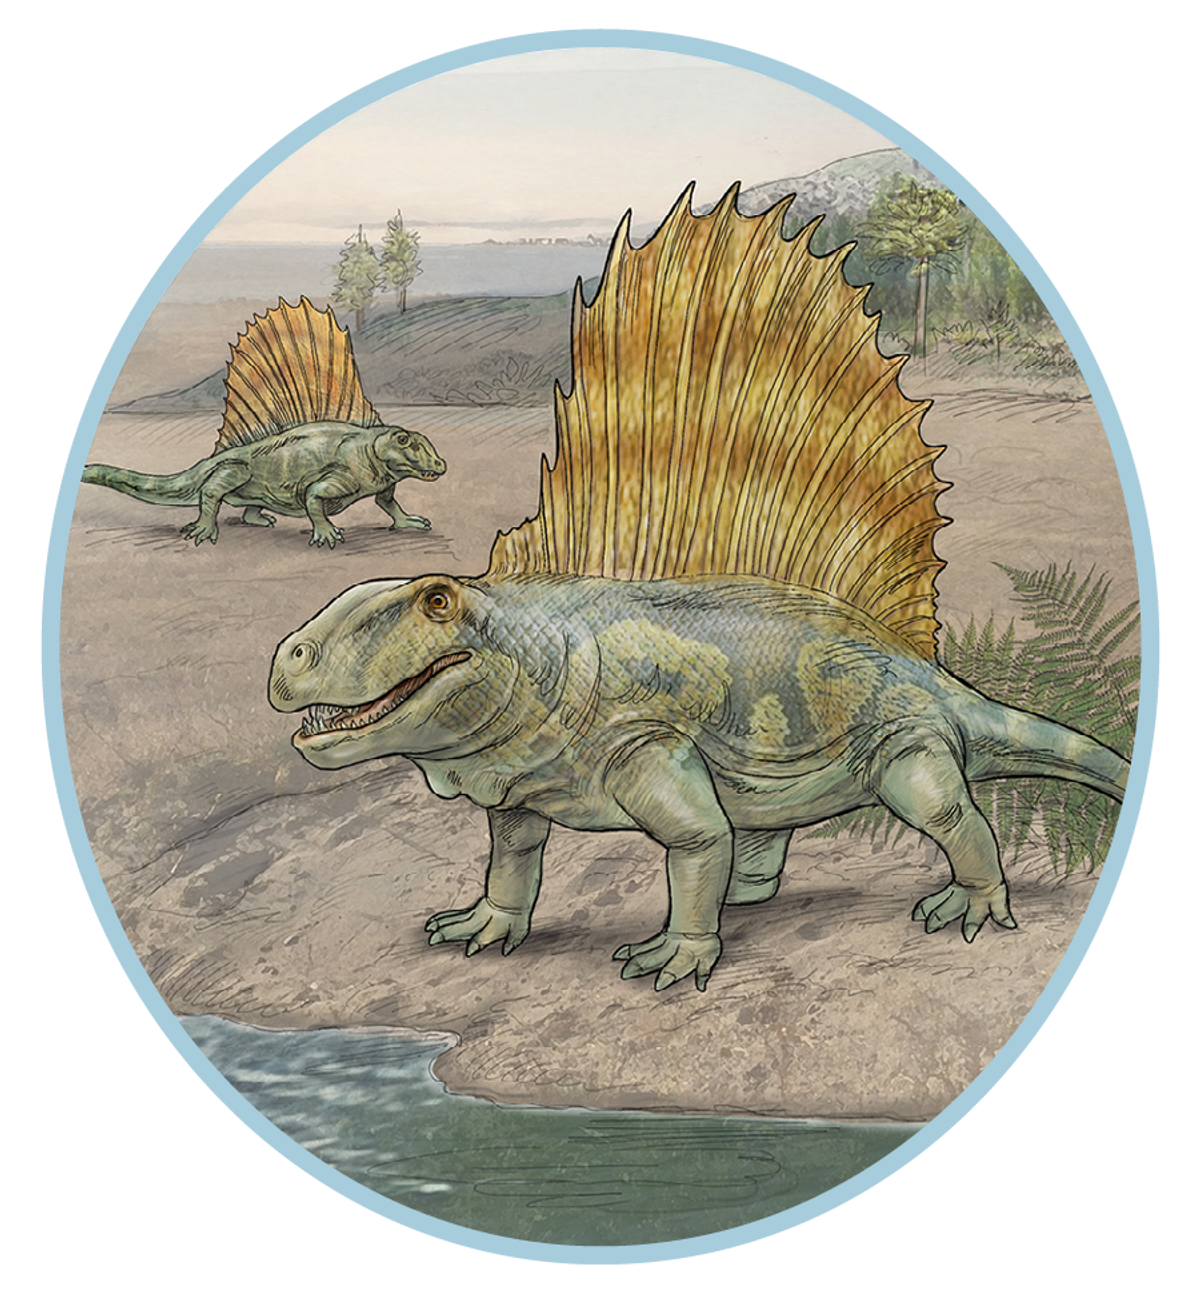 Illustration of extinct creatures from the Permian-Triassic period